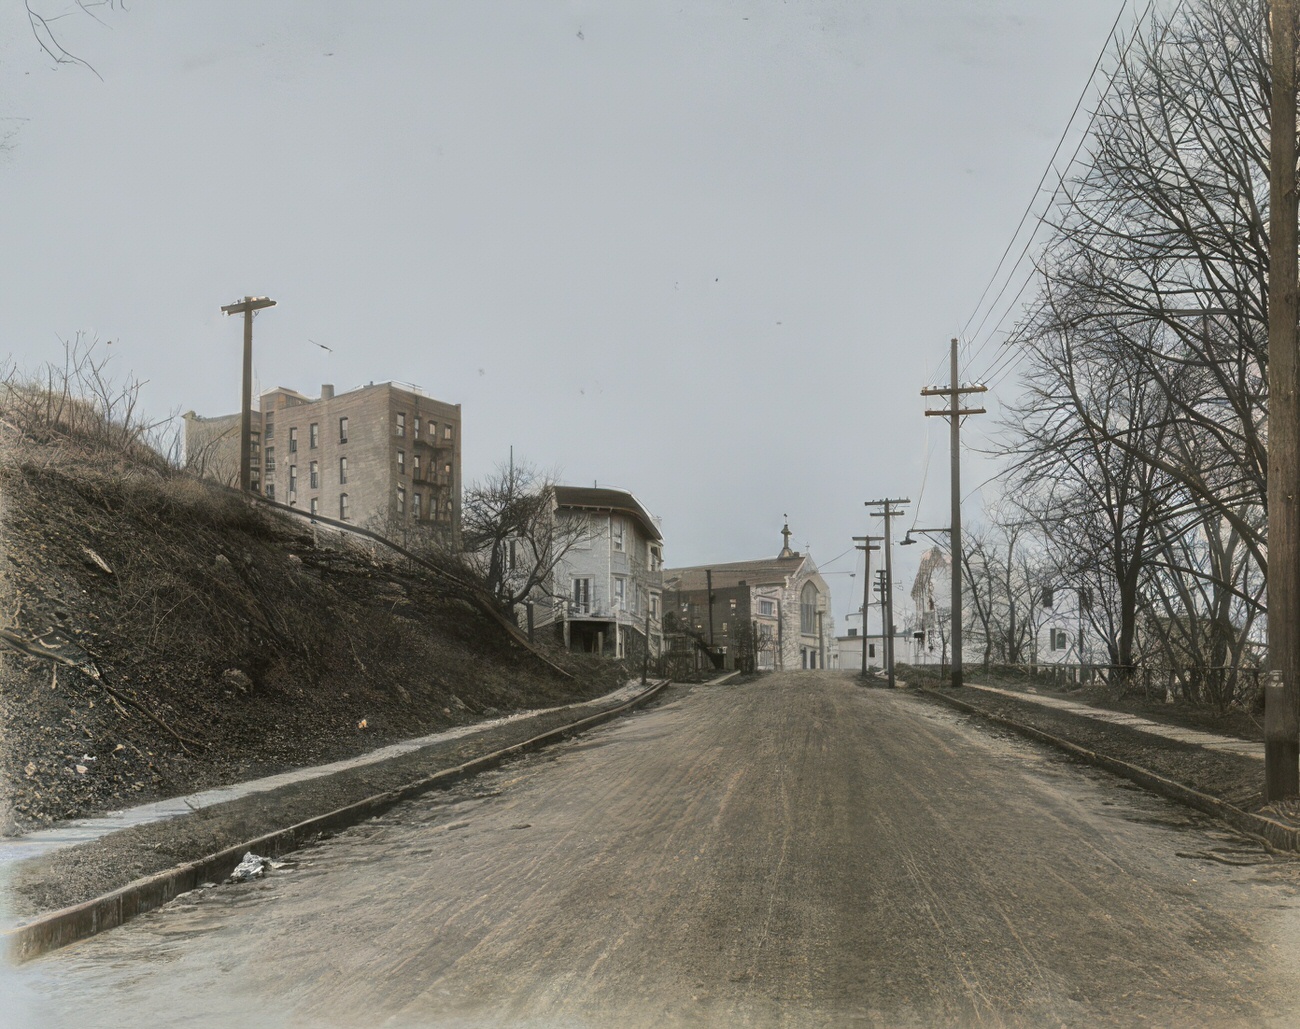 Shakespeare Avenue, Looking North From 166Th Street, Circa 1915.